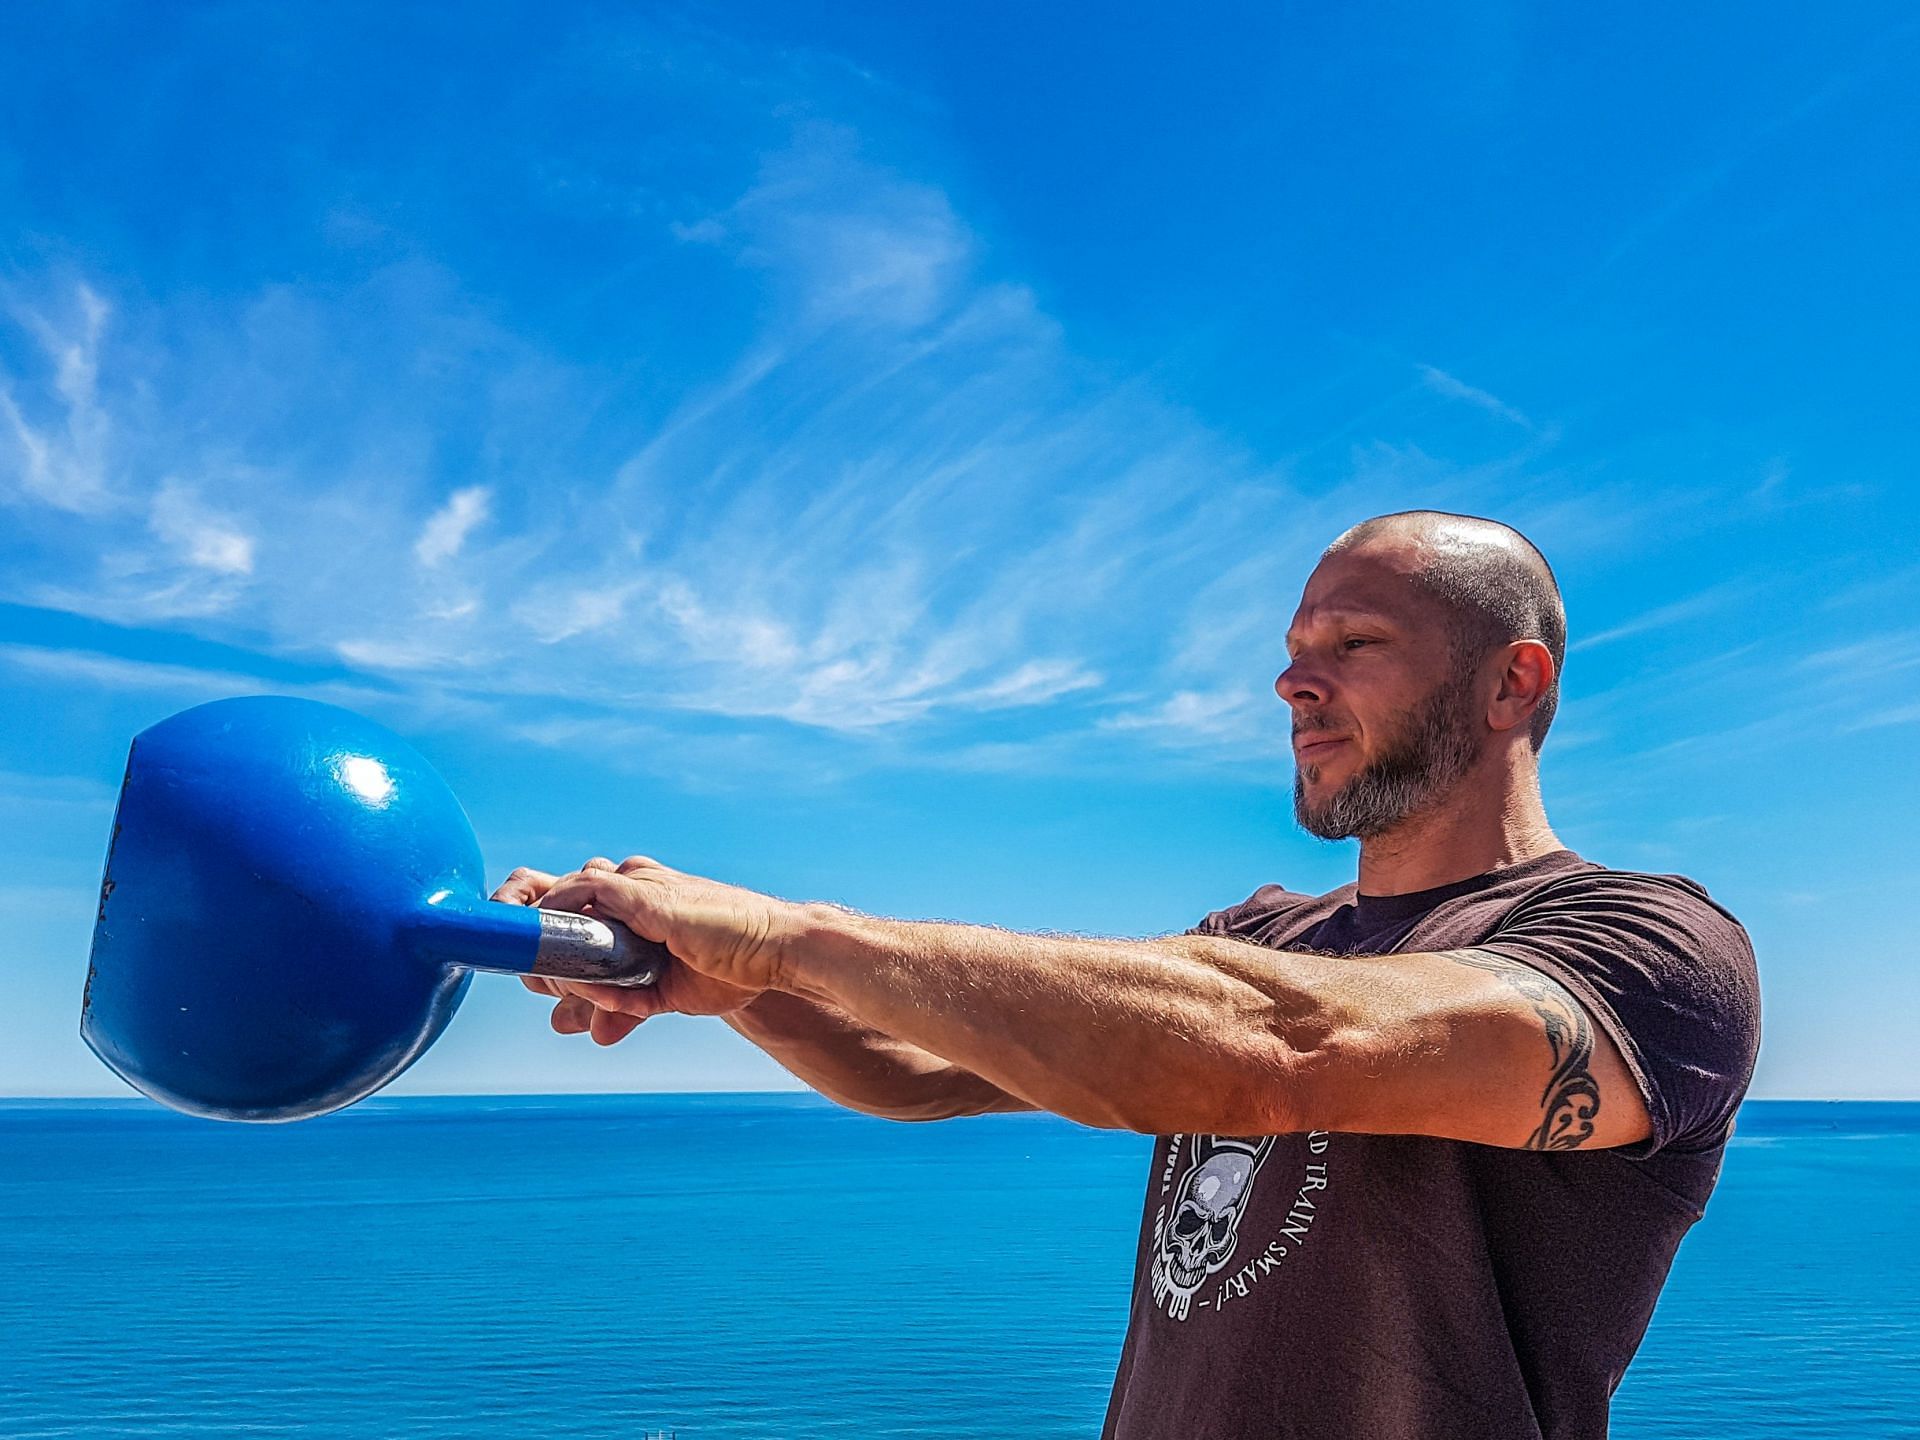 kettlebell workout is a great way to develop a full-body strength. (Image via Pexels / Taco Fleur)